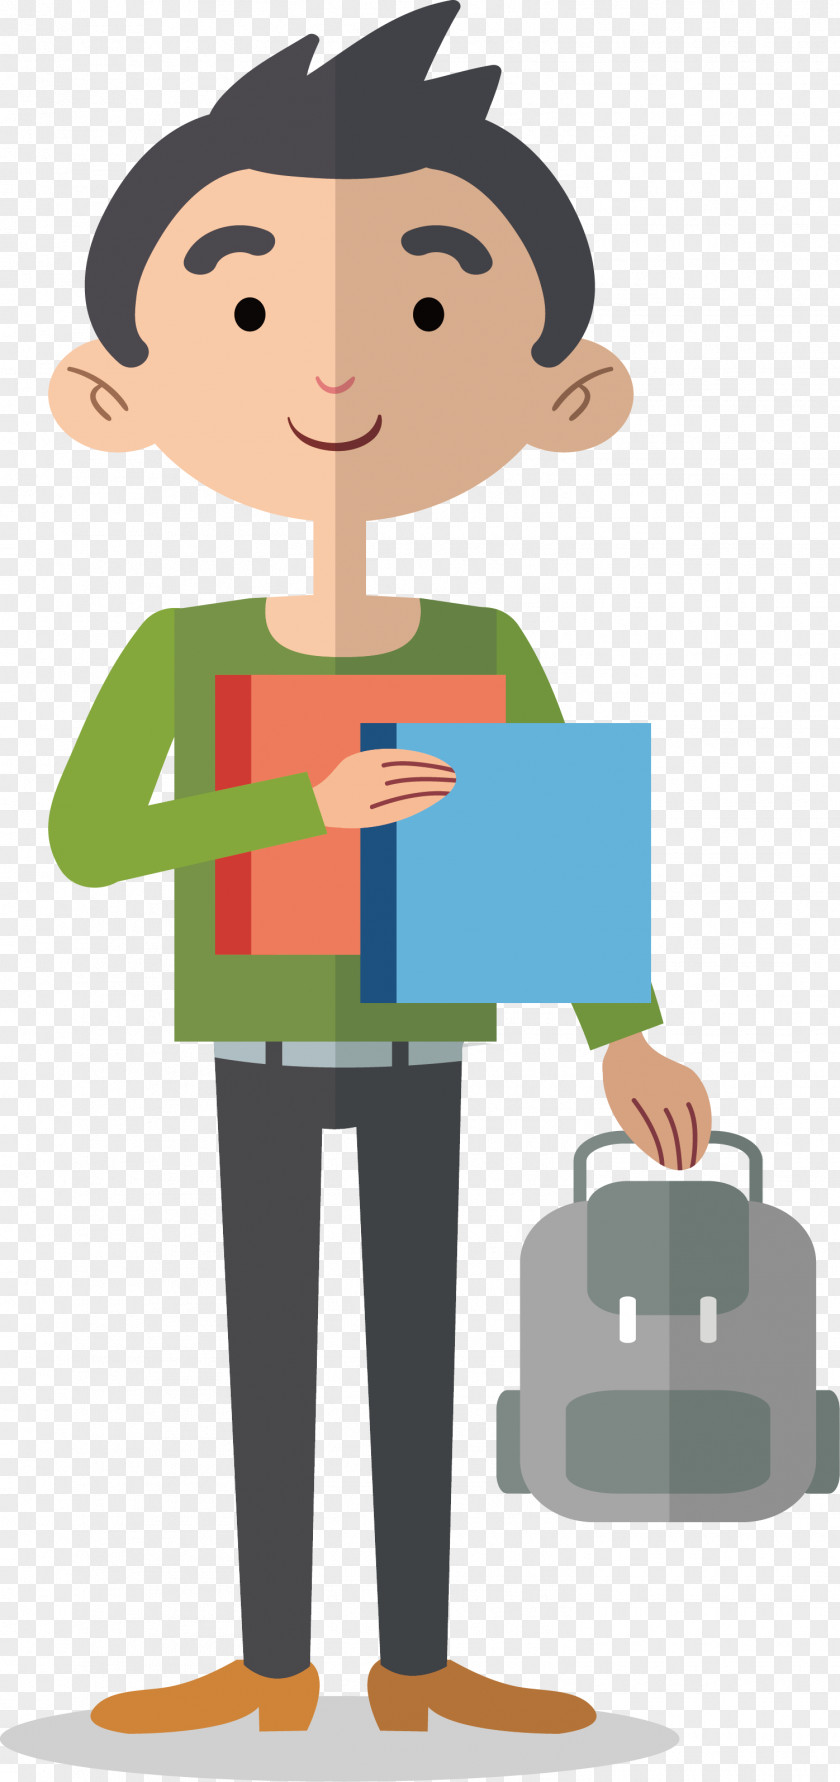 The Boy With Bag Drawing Clip Art PNG